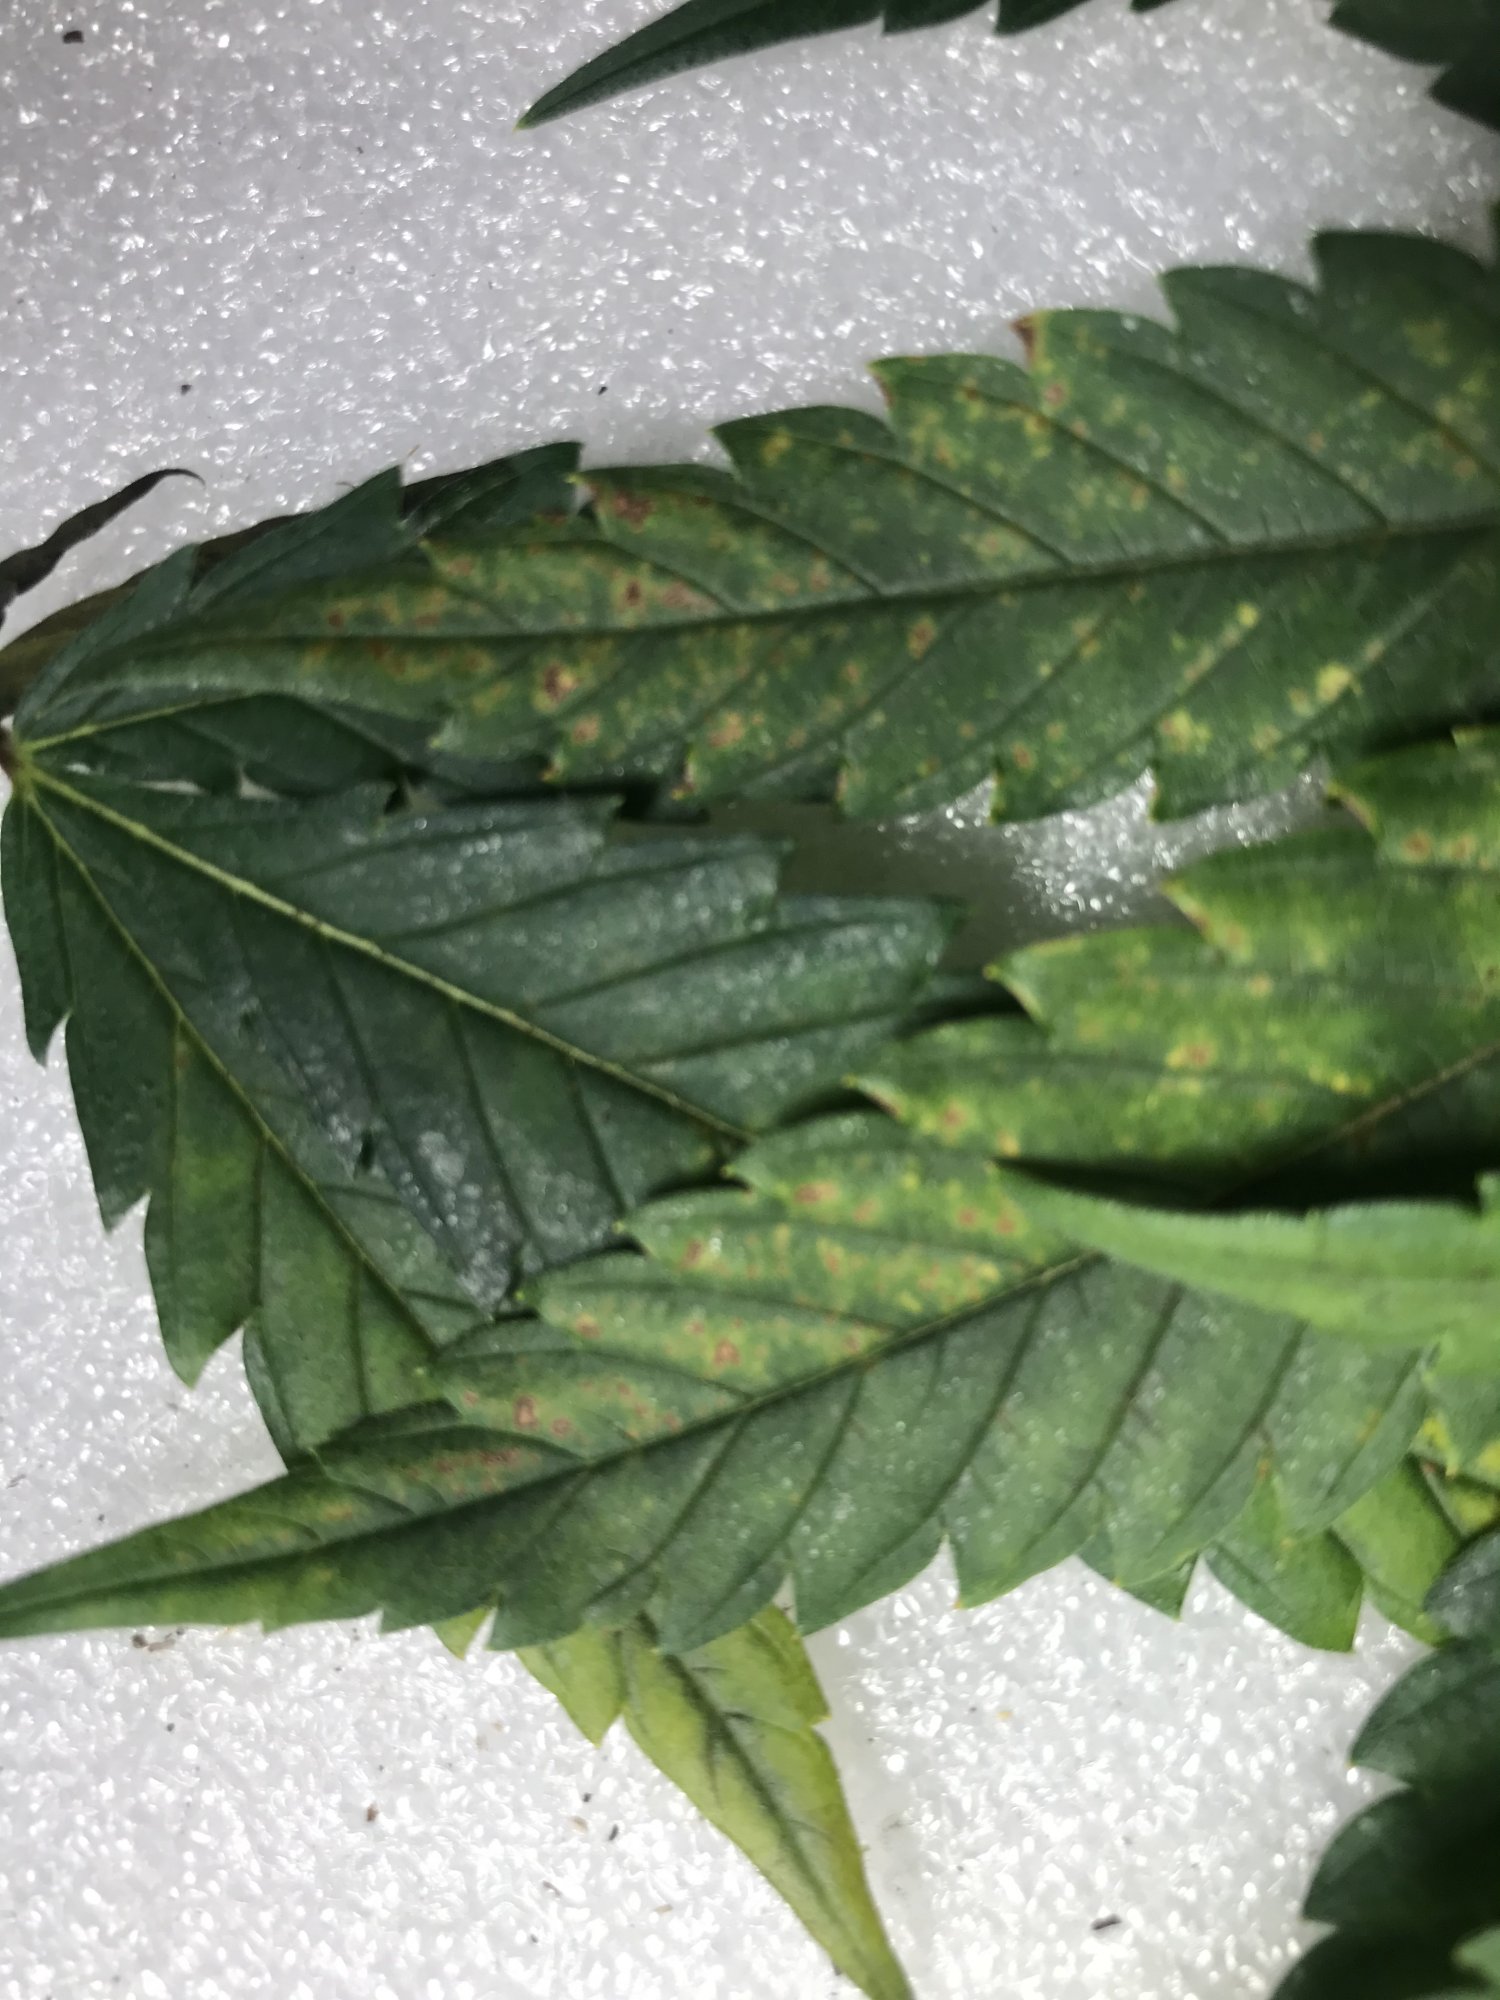 Yellowing tips on lower leaves whats my likely problem 2